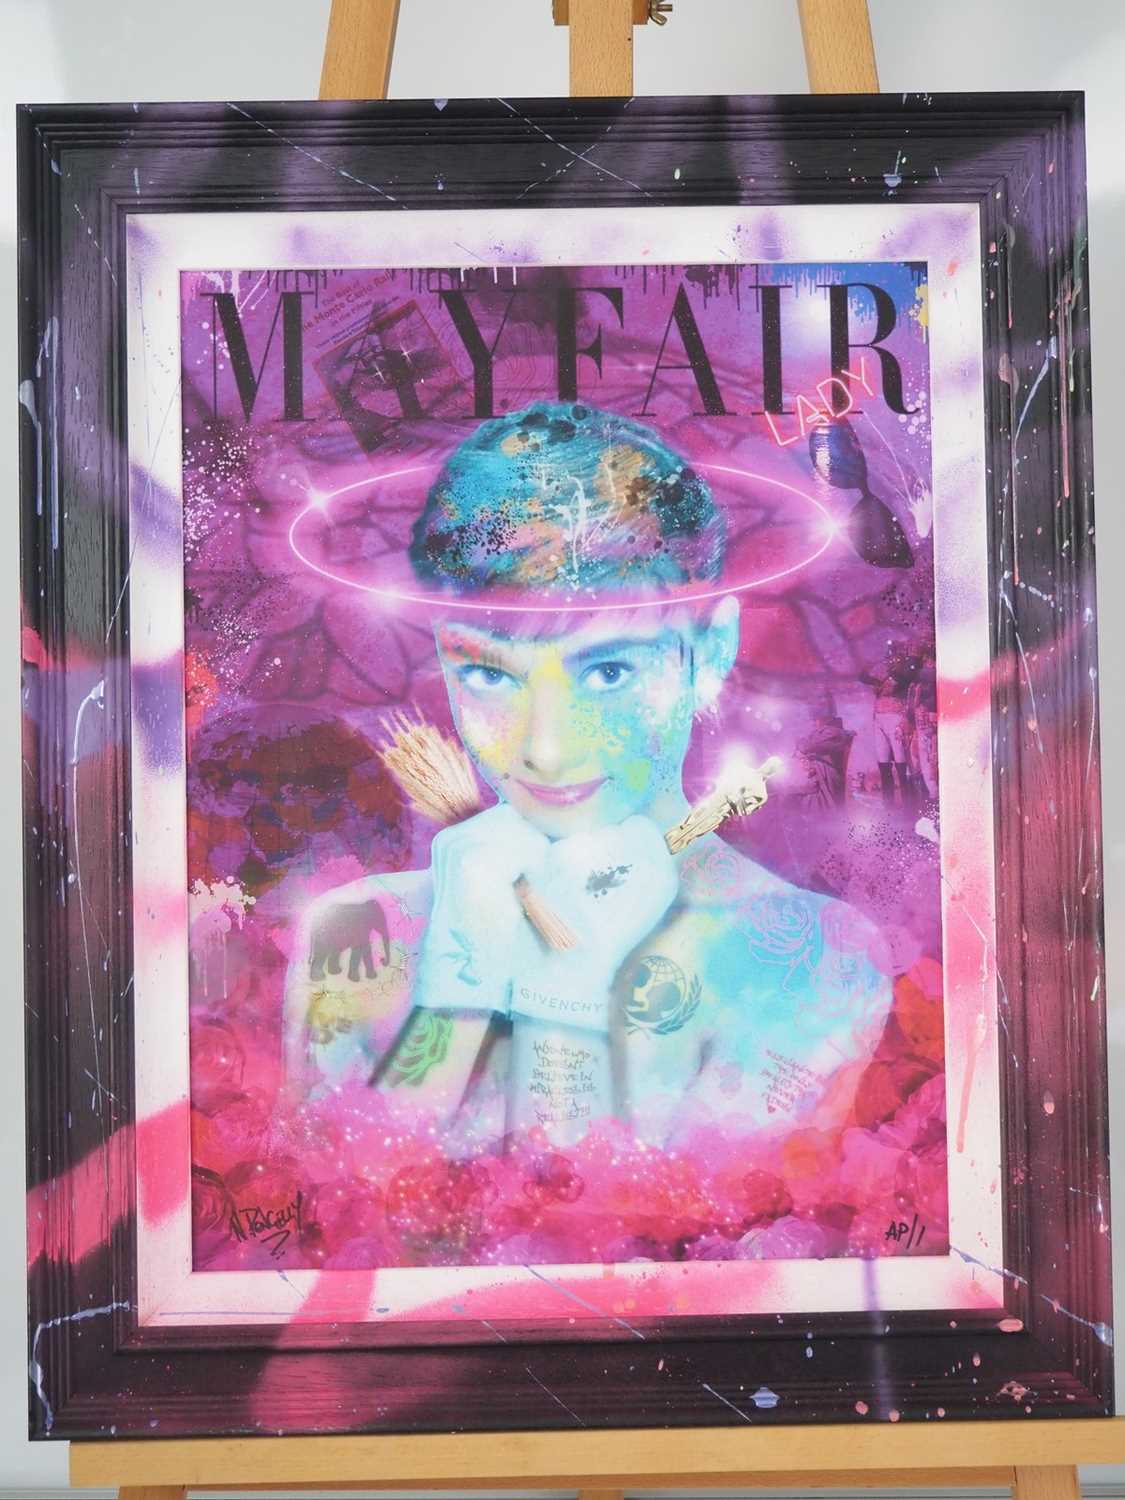 Neil Pengelly 'MY FAIR LADY' (Audrey Hepburn) - signed and marked AP/1 - Original artwork with - Image 5 of 5